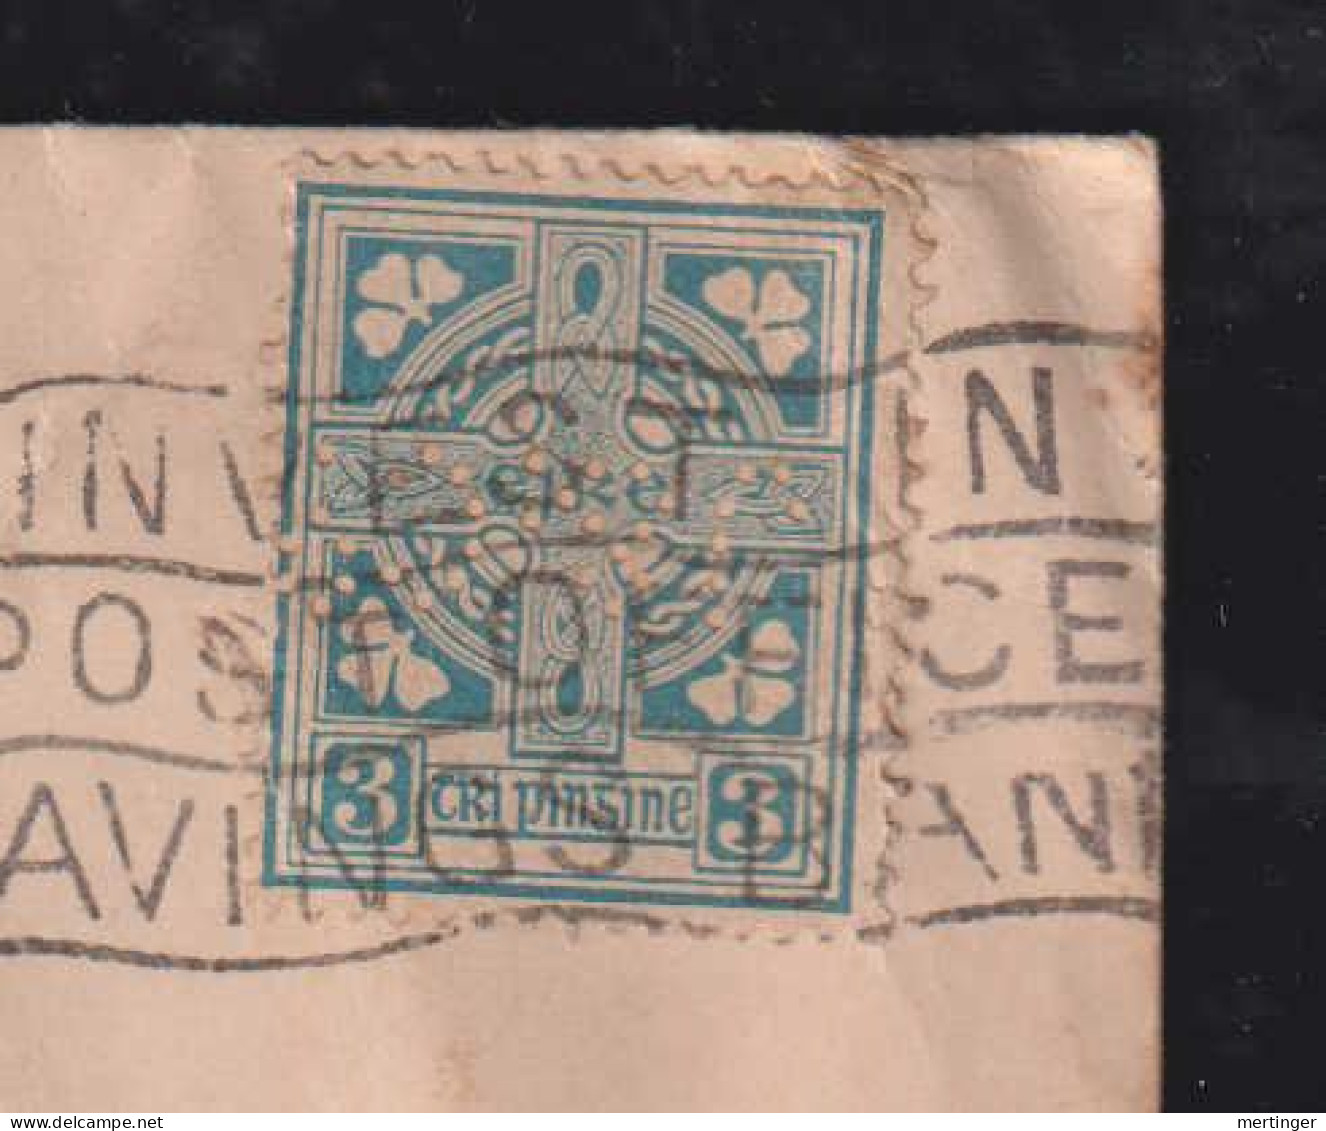 Irland Eire 1923 Cover 3P  DUBLIN X Dutch CURACAO Perfin W.& R. JACOB Biscuit - Lettres & Documents